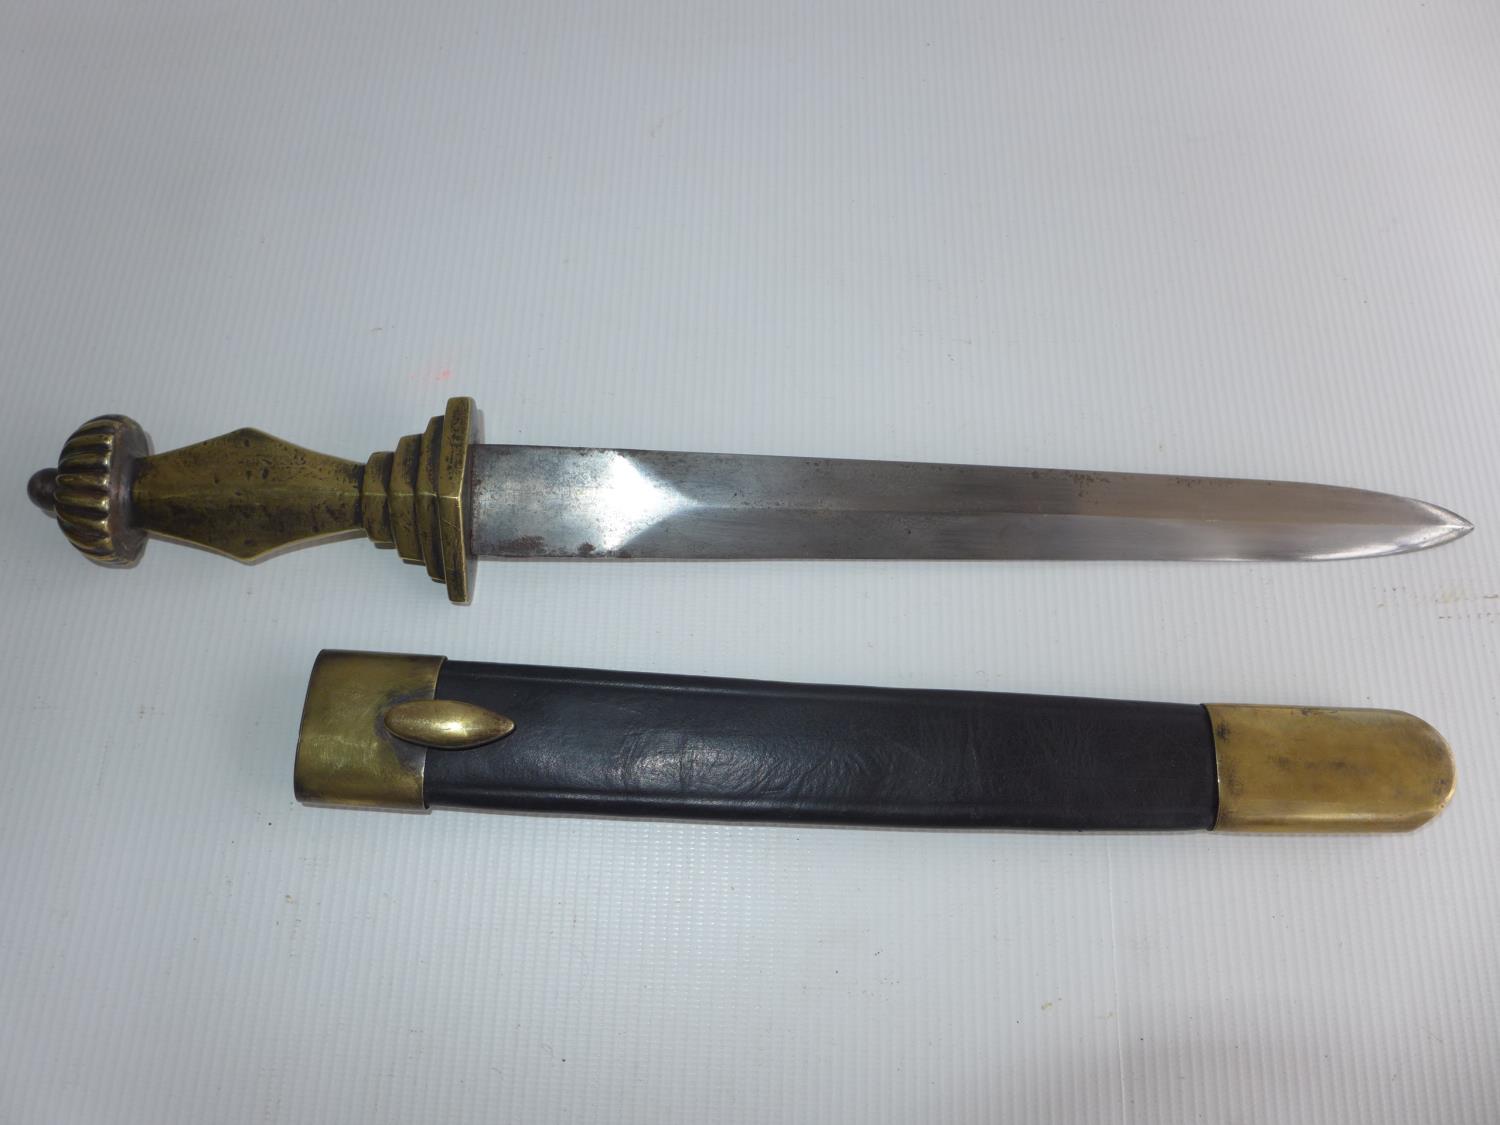 A HEAVY BRASS GRIPPED KNIFE AND SCABBARD, 28cm BLADE